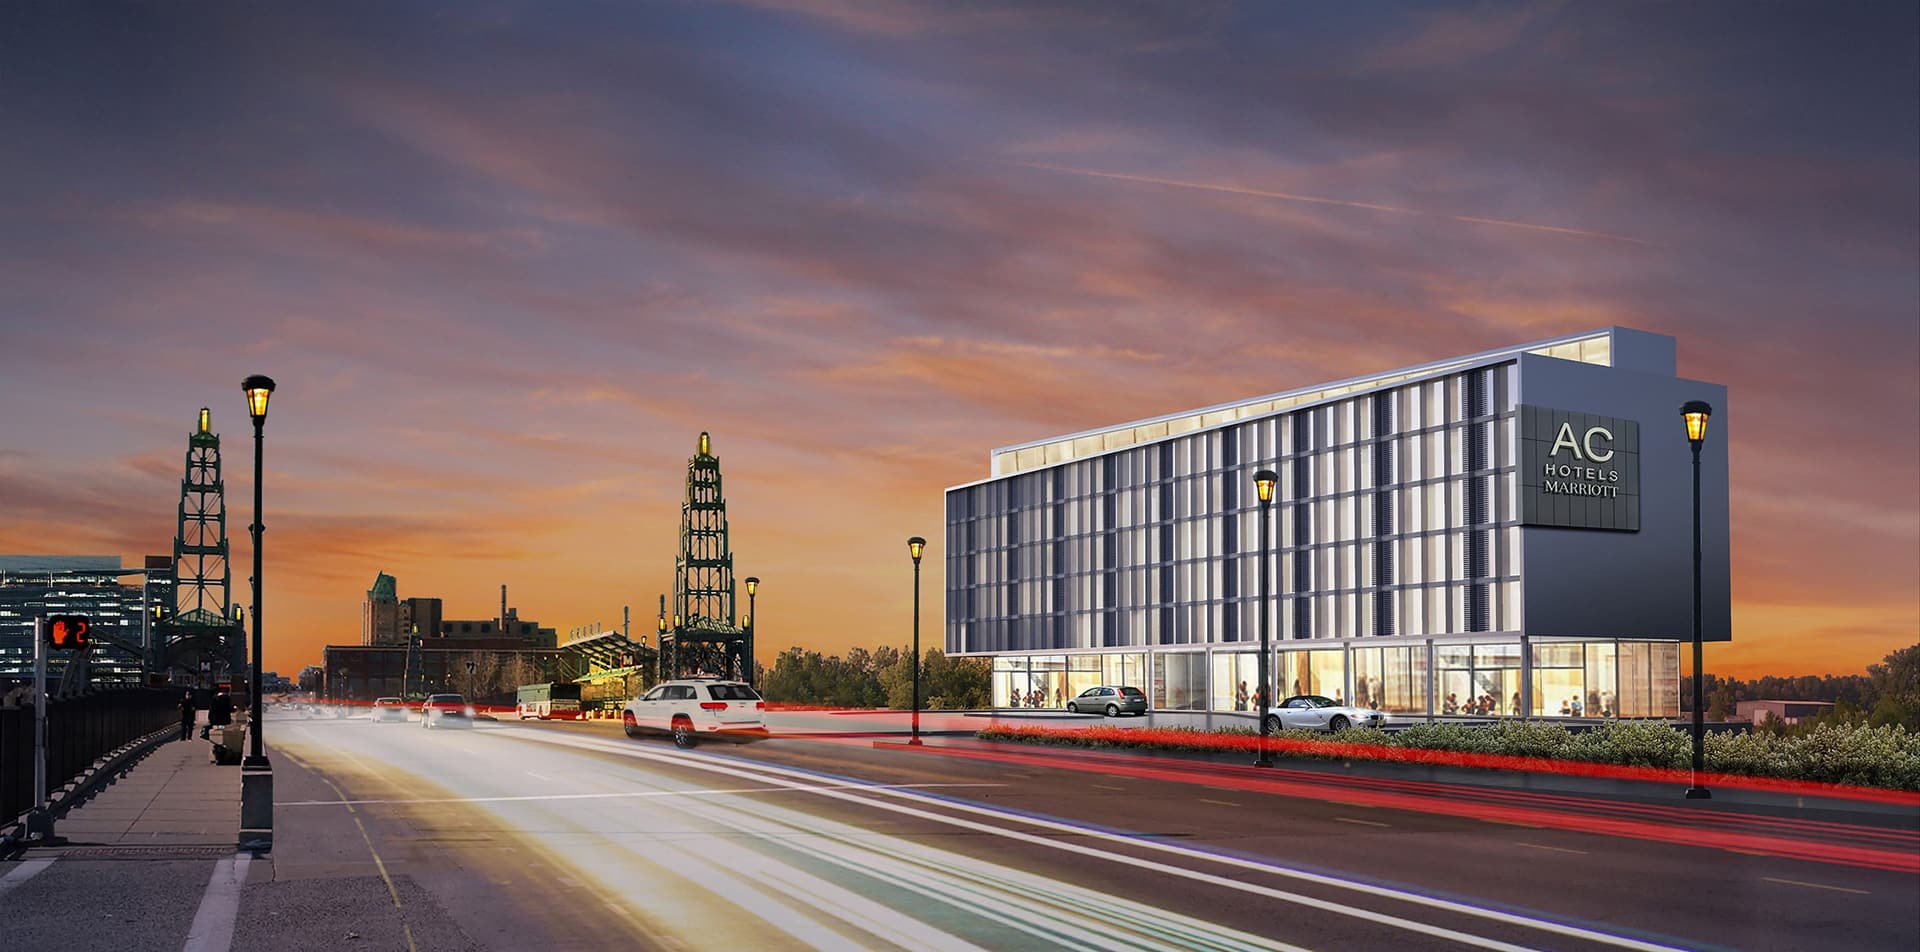 rendering of armory hotel exterior building design by trivers architectural firm in st. louis